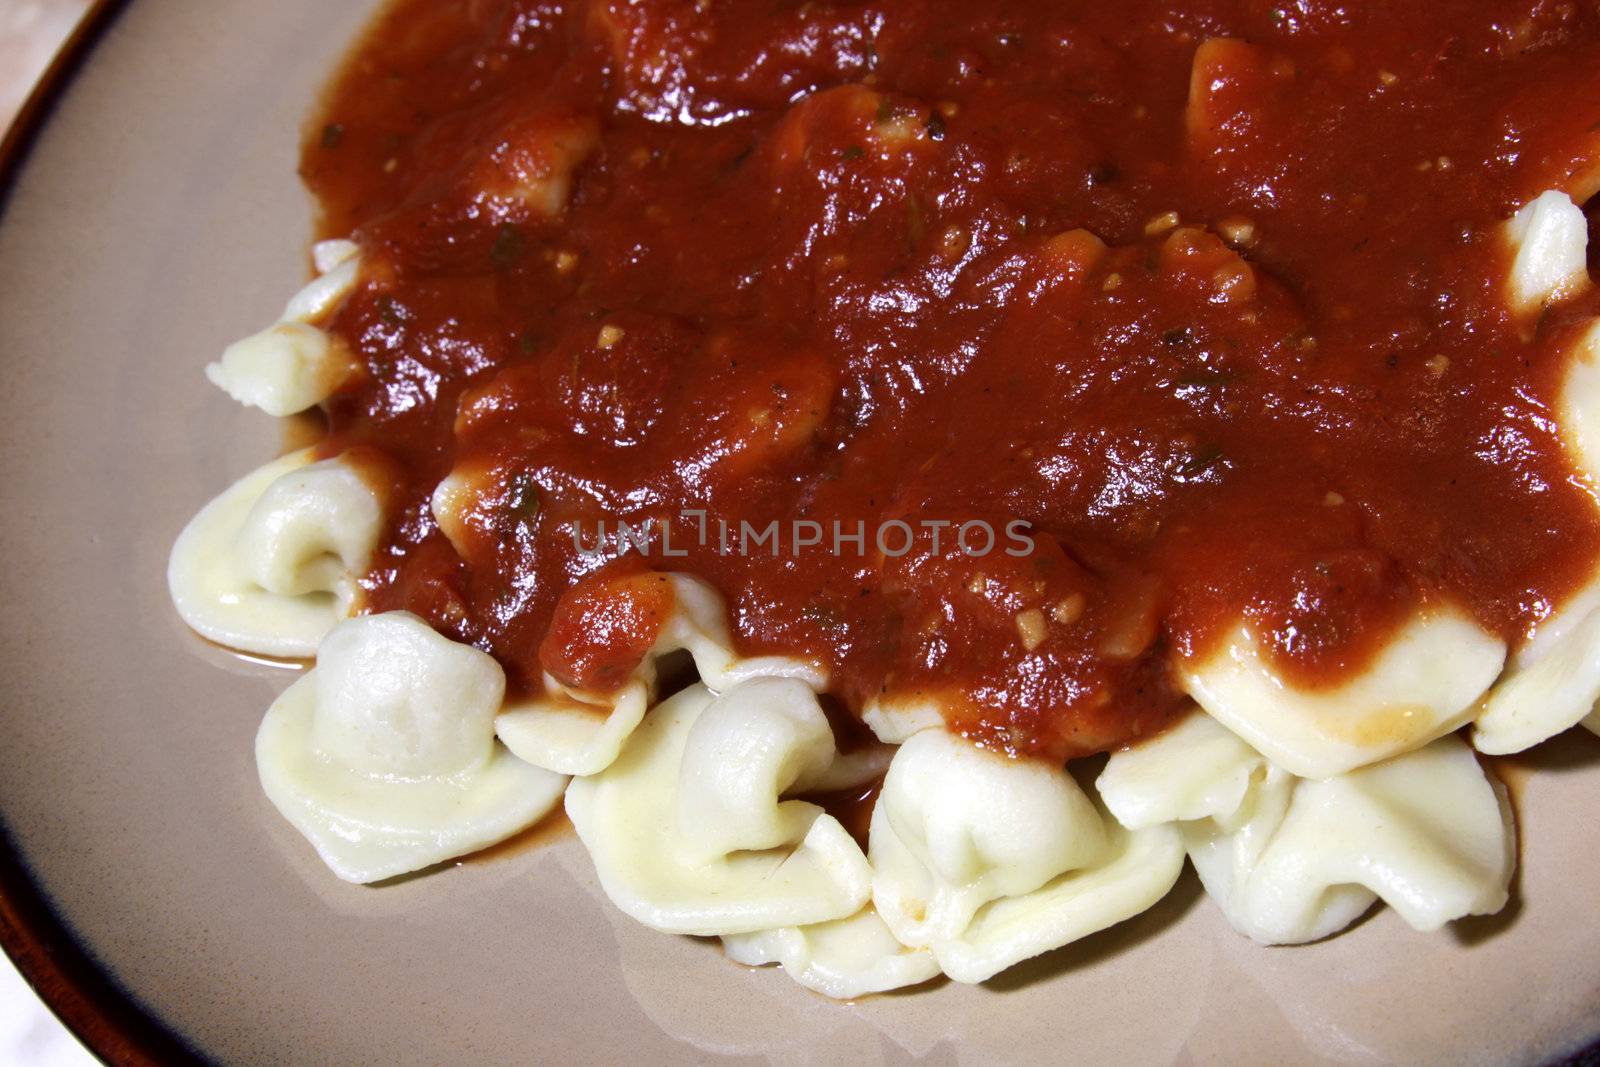 A tortellini and basil tomato sauce on a plate.
